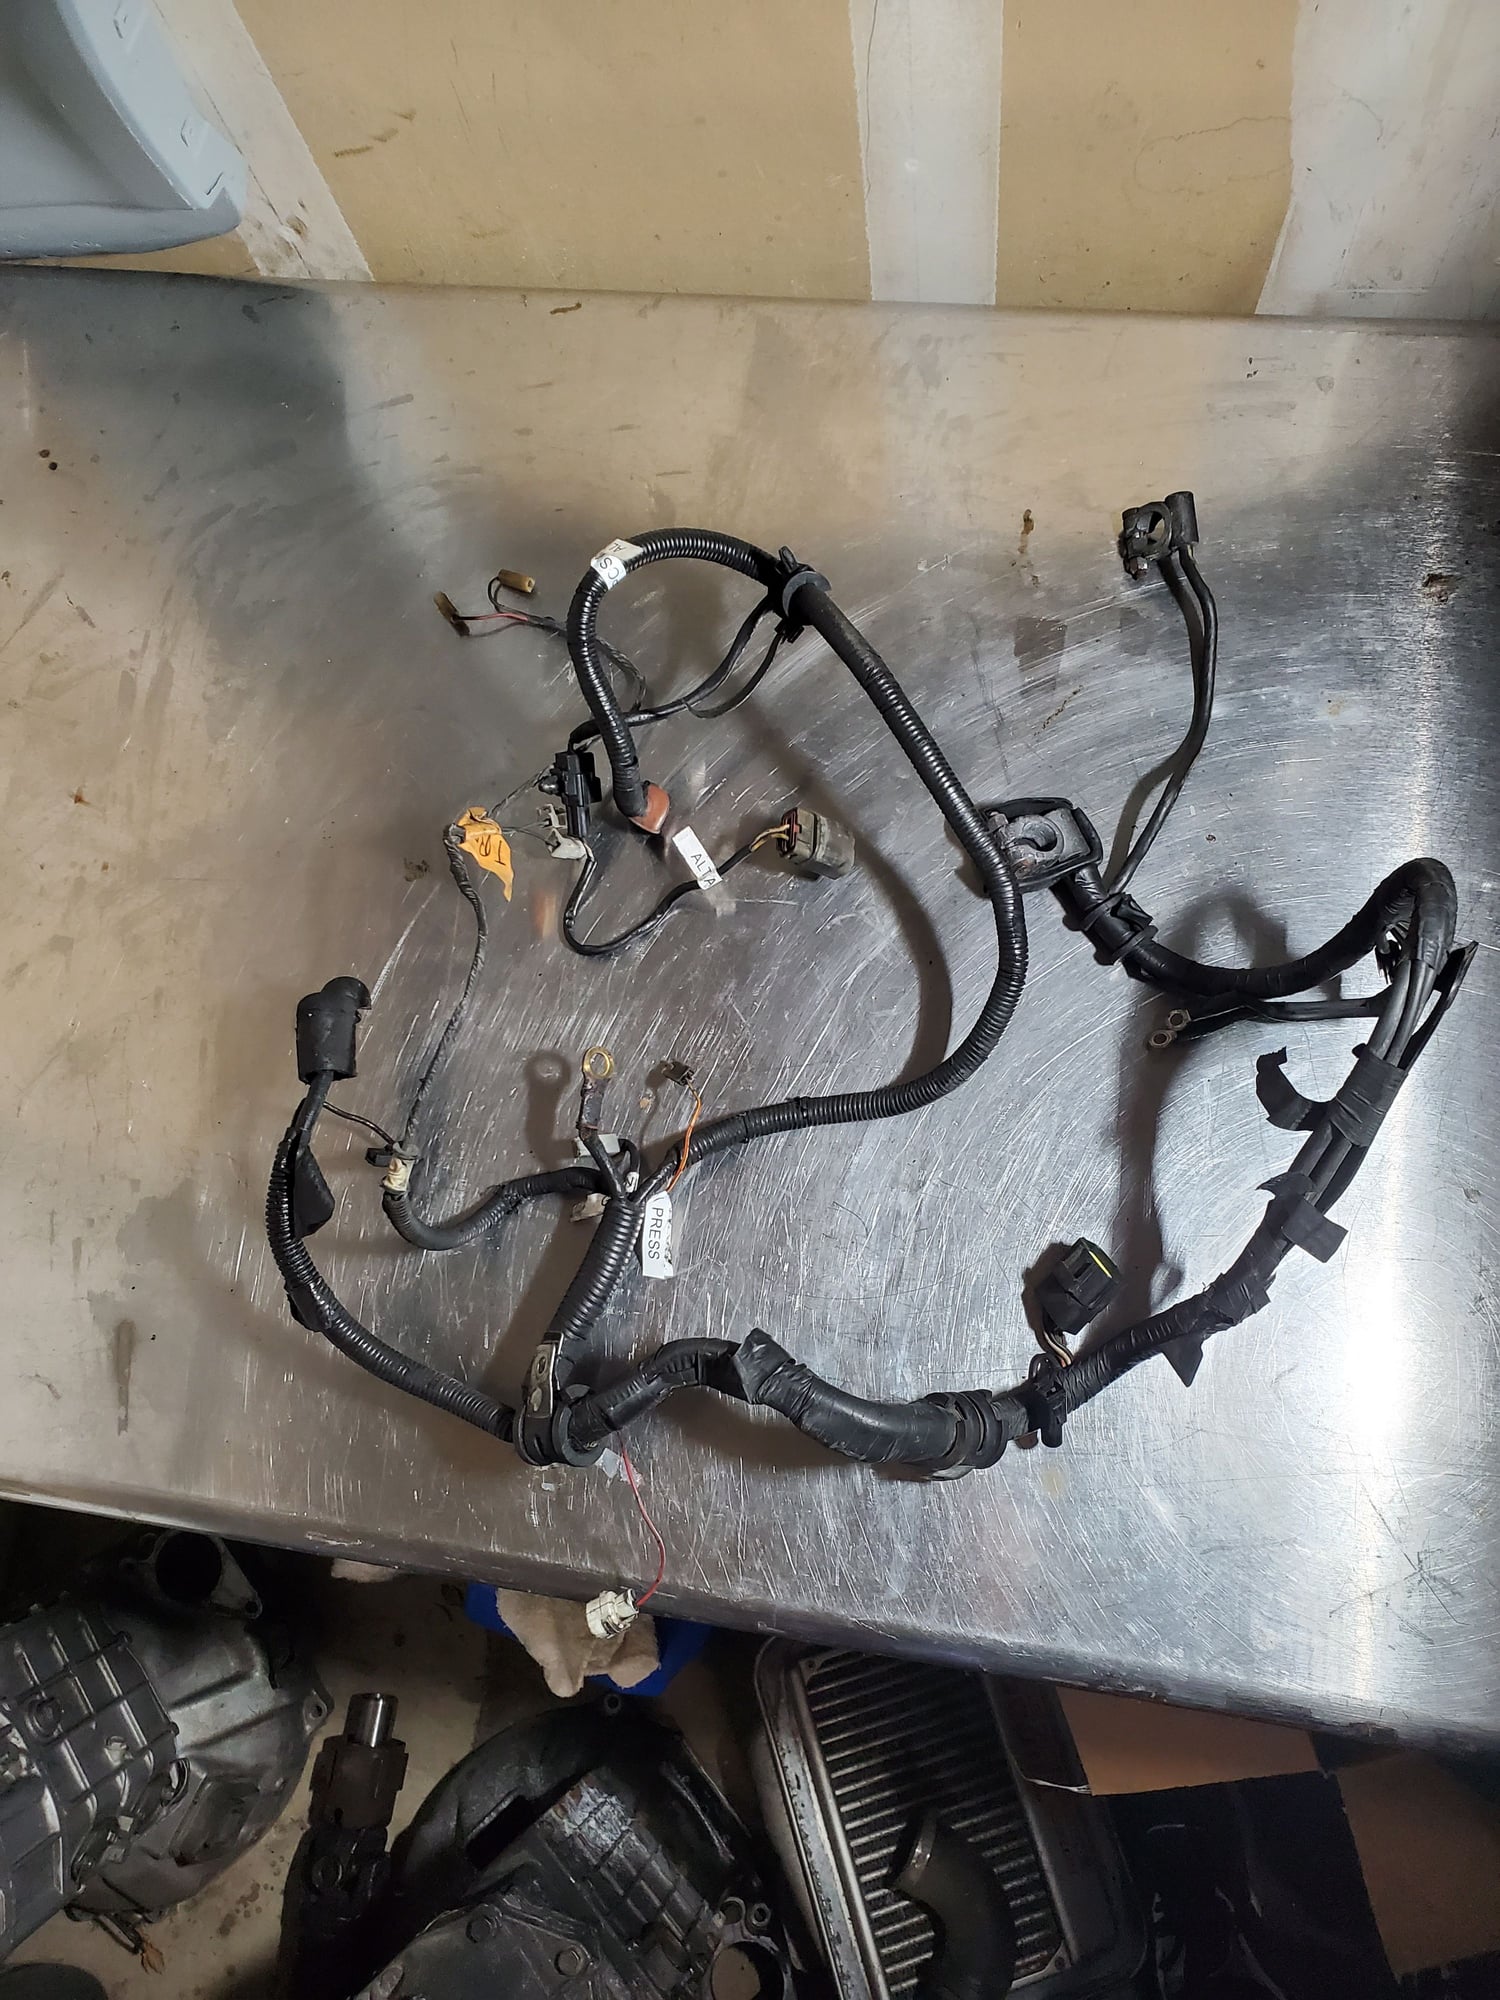 Engine - Electrical - S5 turbo battery harness - Used - 1988 to 1991 Mazda RX-7 - Fairfield, CA 94534, United States